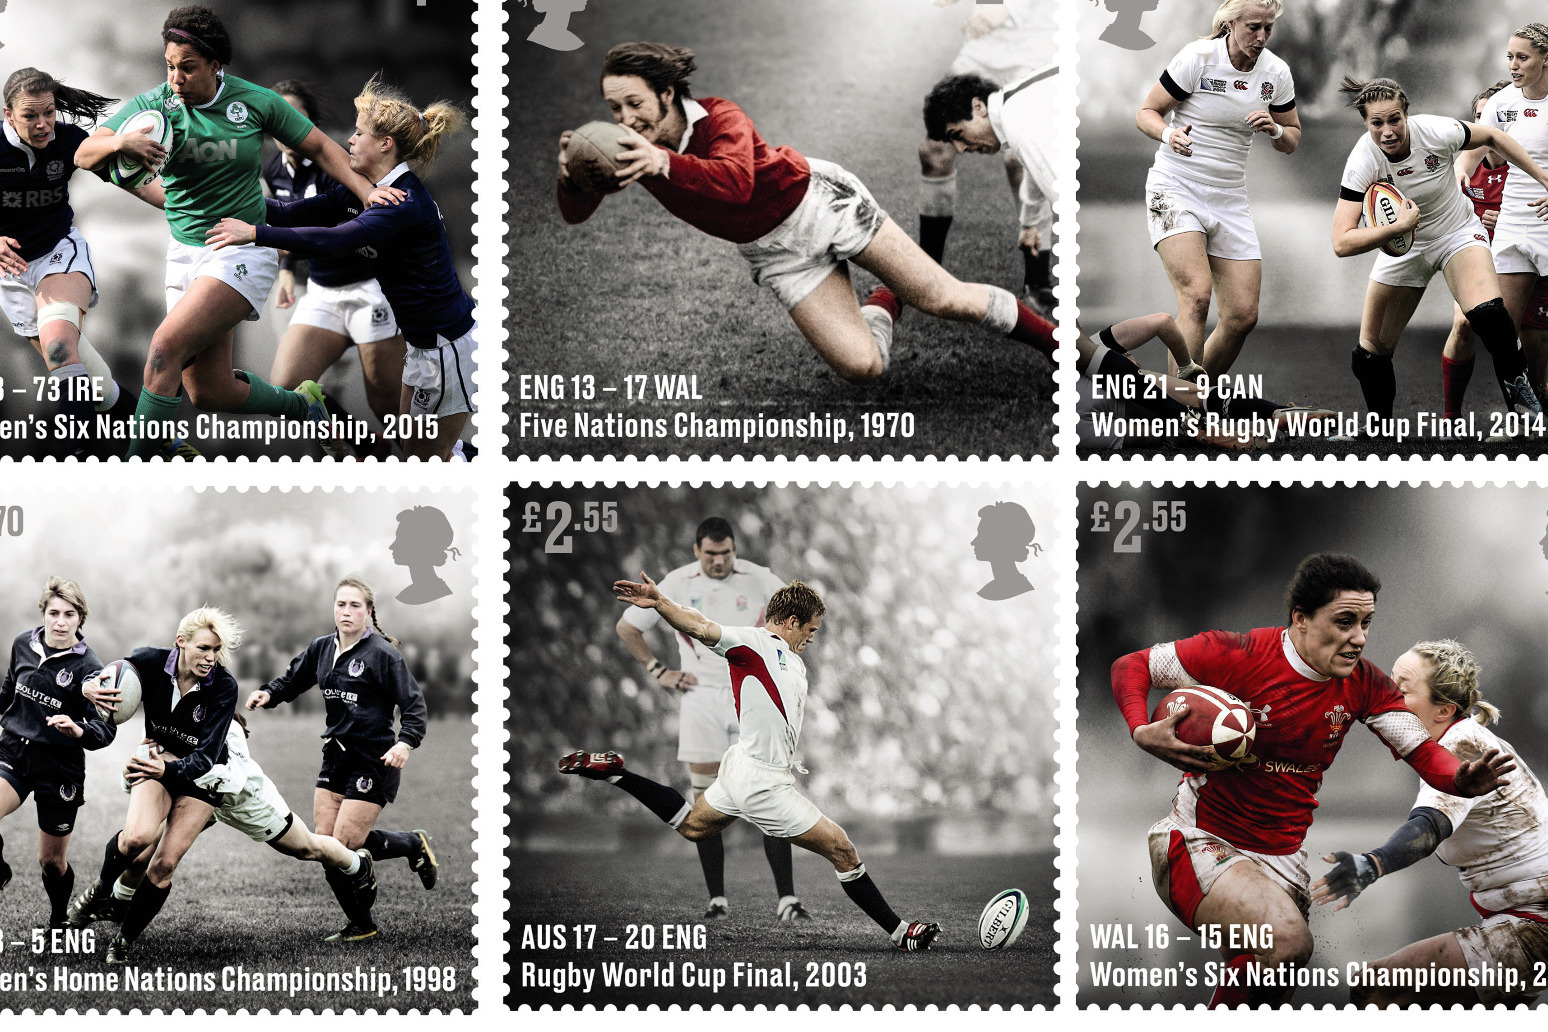 Stamps mark 150th anniversary of Rugby Football Union formation 